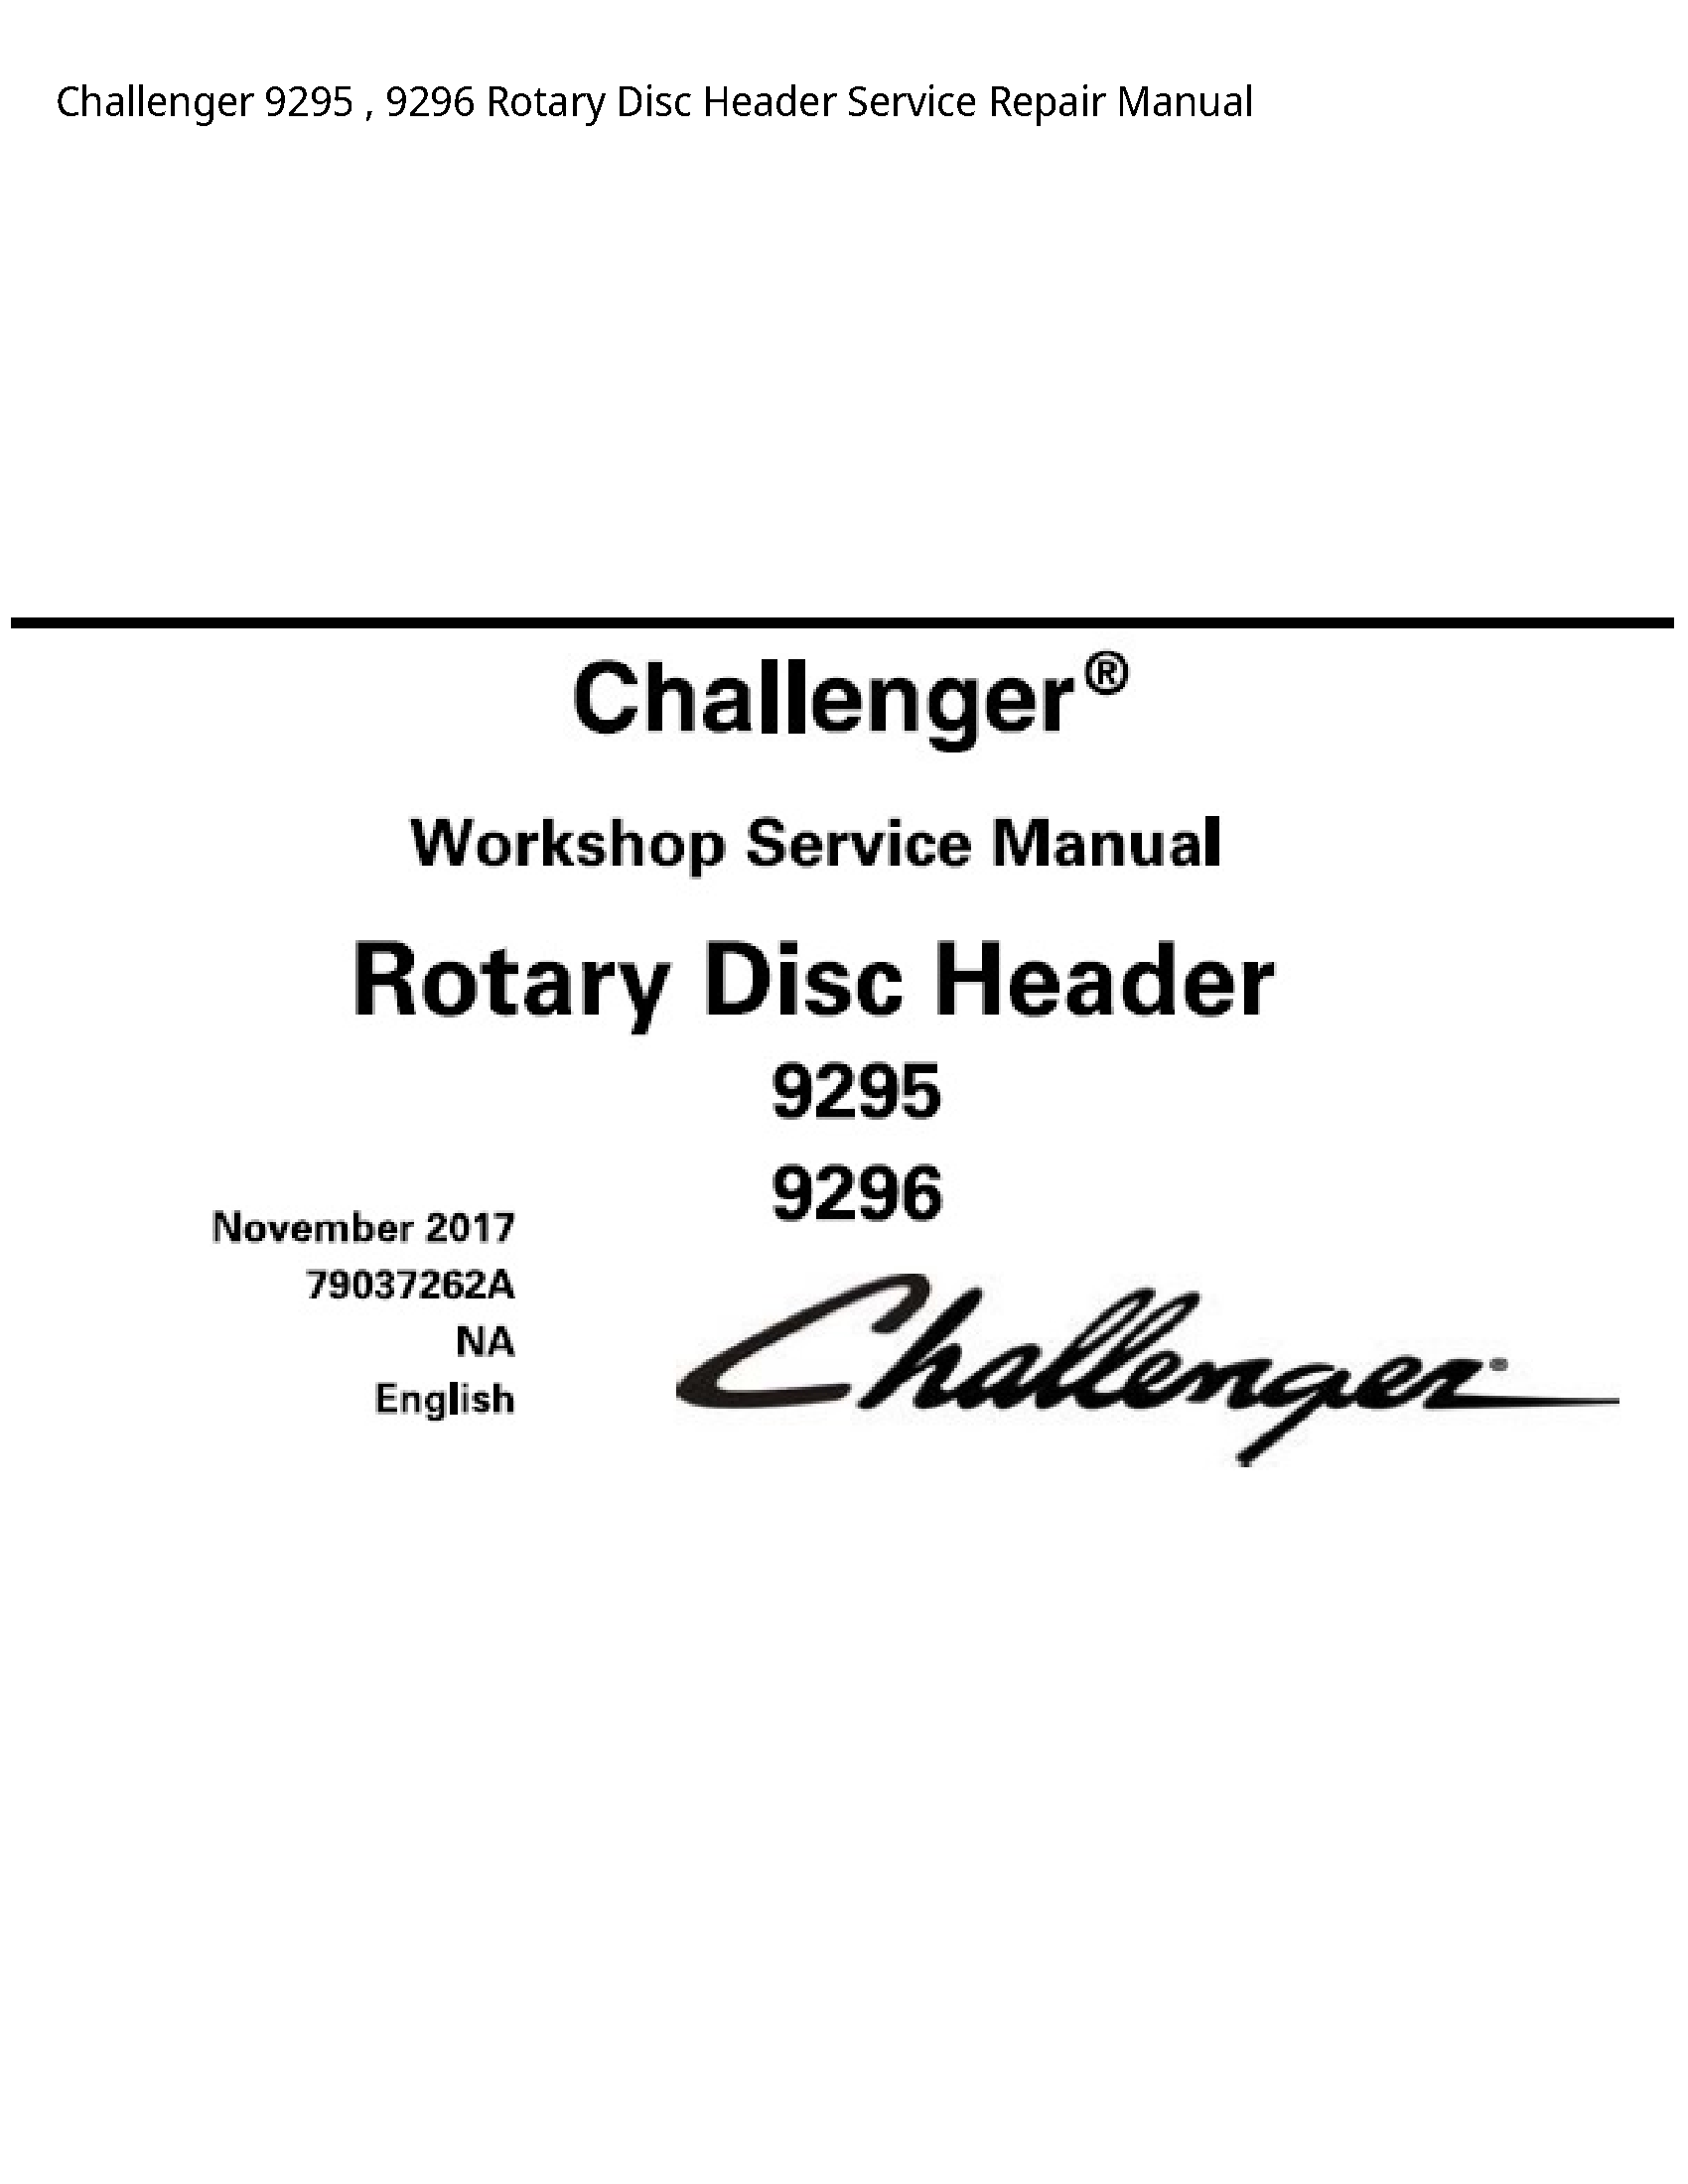 Challenger 9295 Rotary Disc Header manual